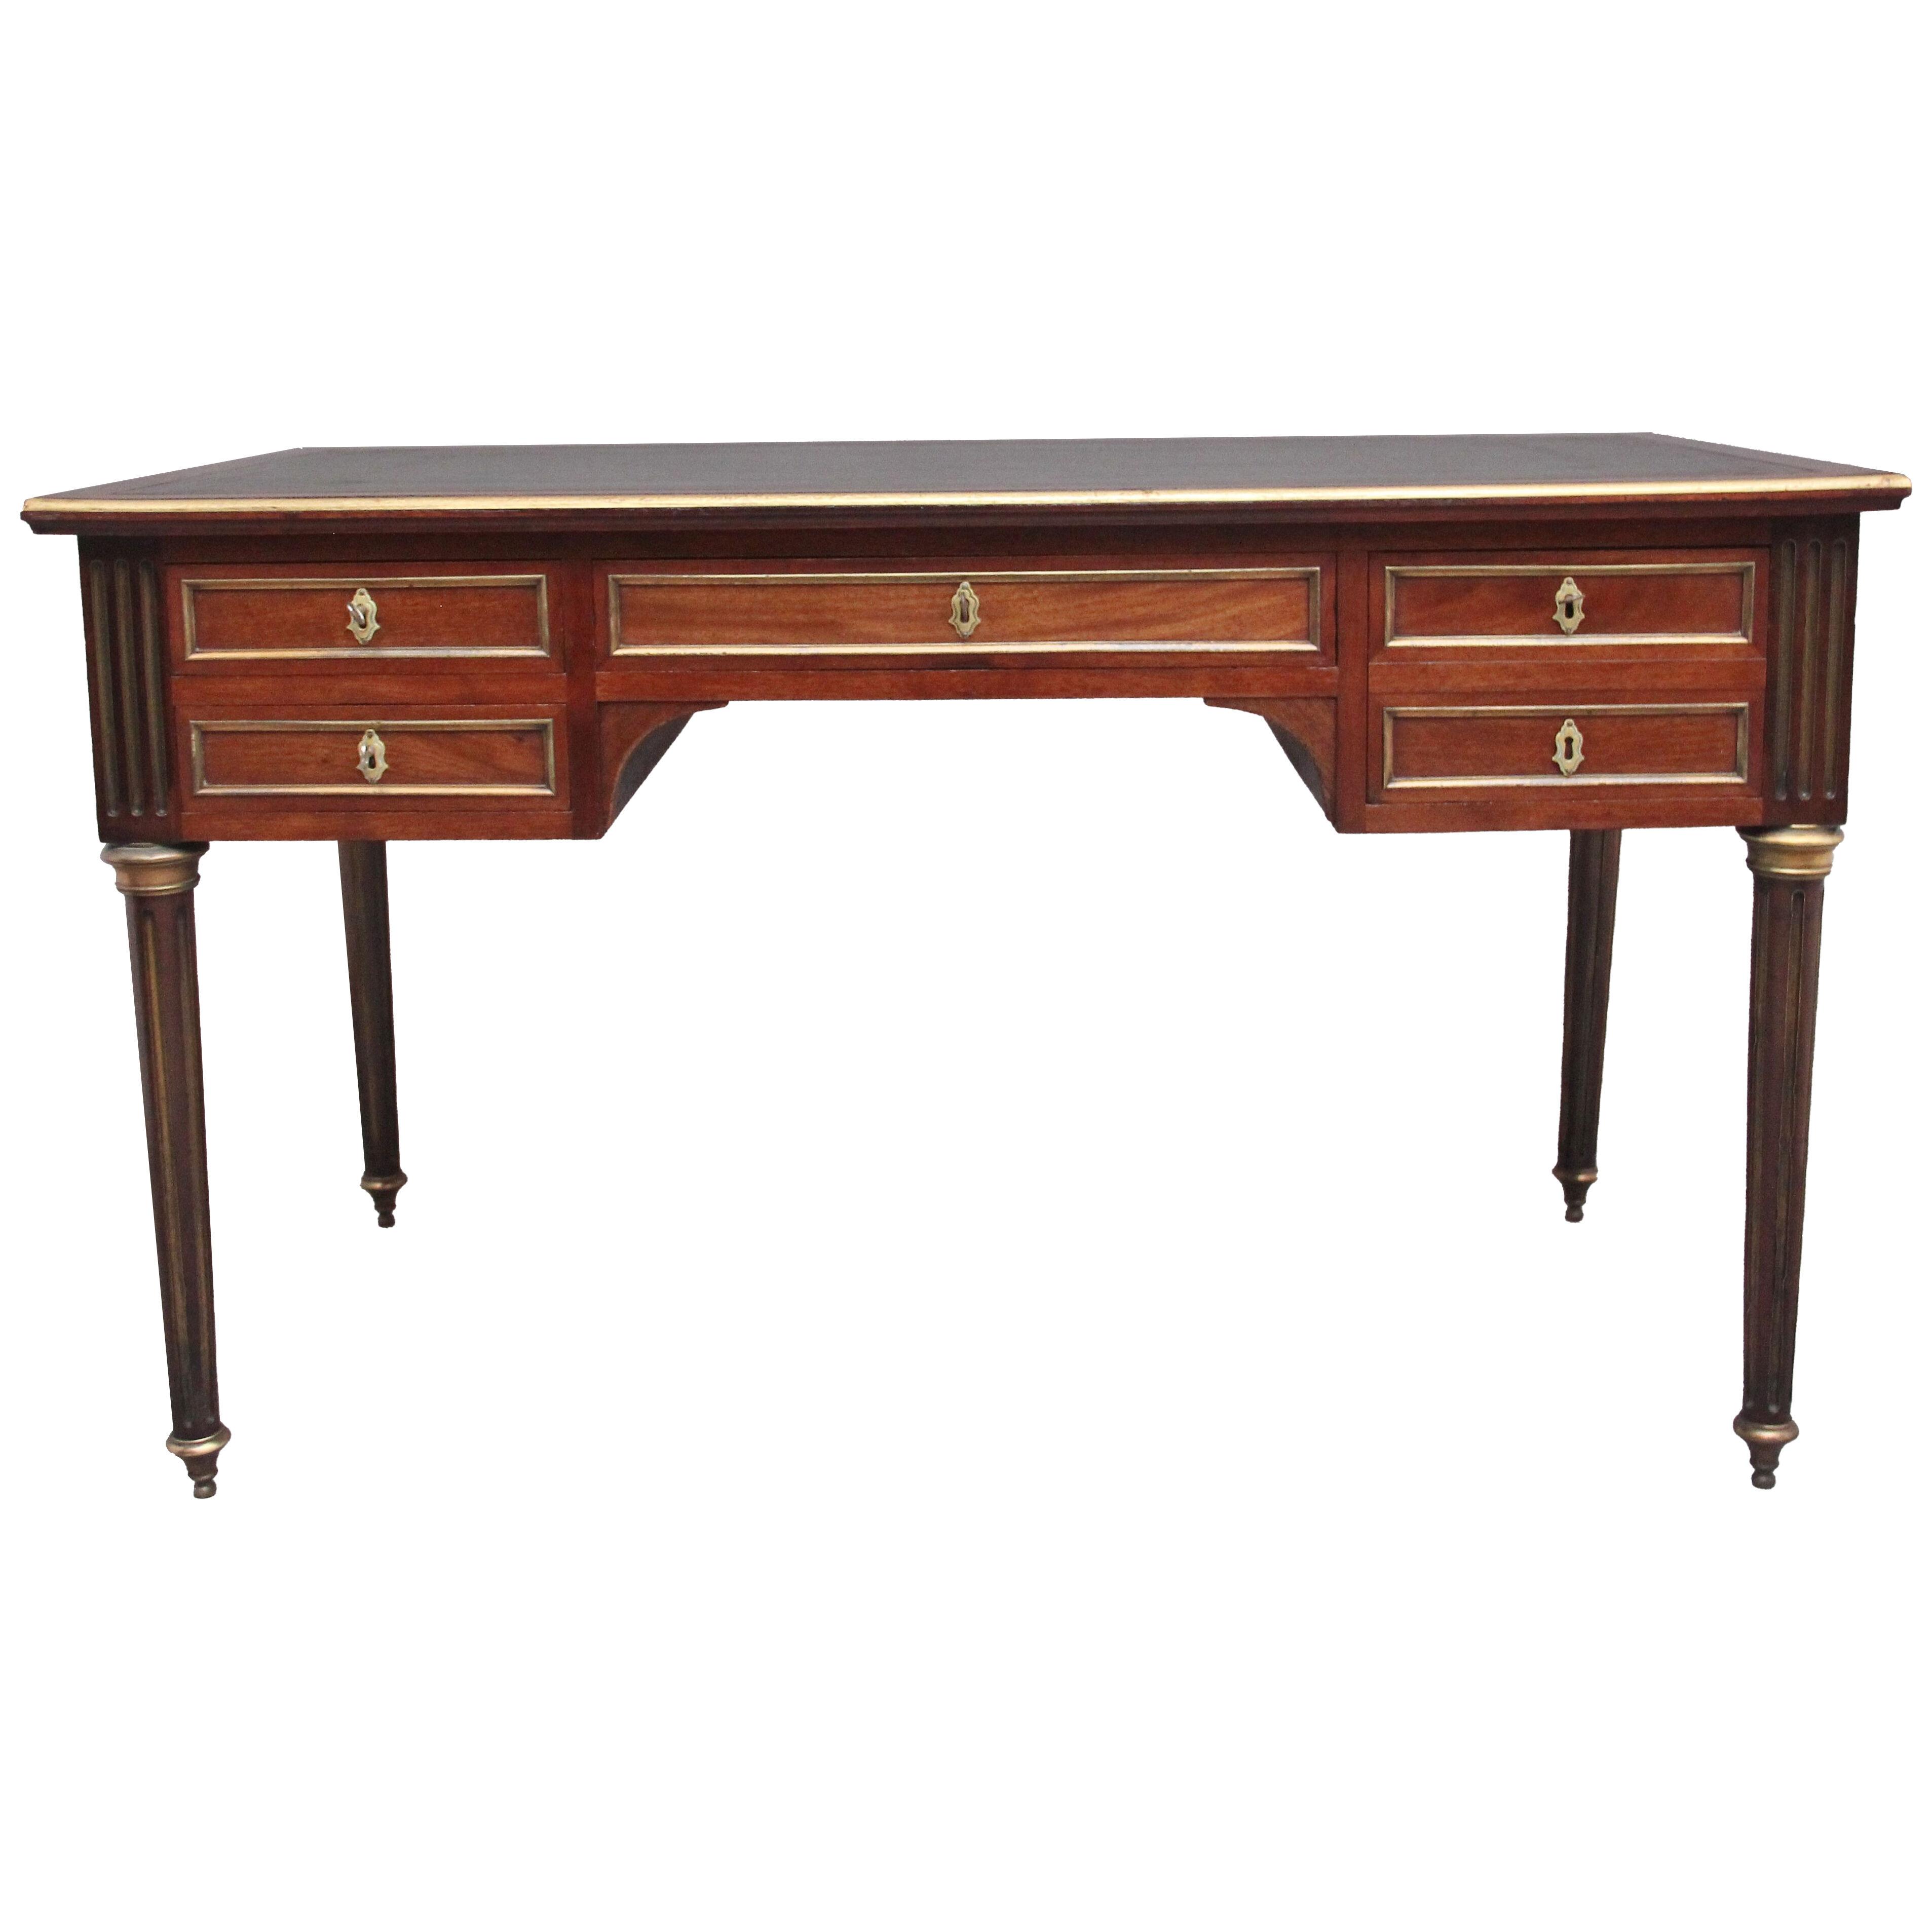 19th Century French mahogany and brass inlaid directoire writing desk